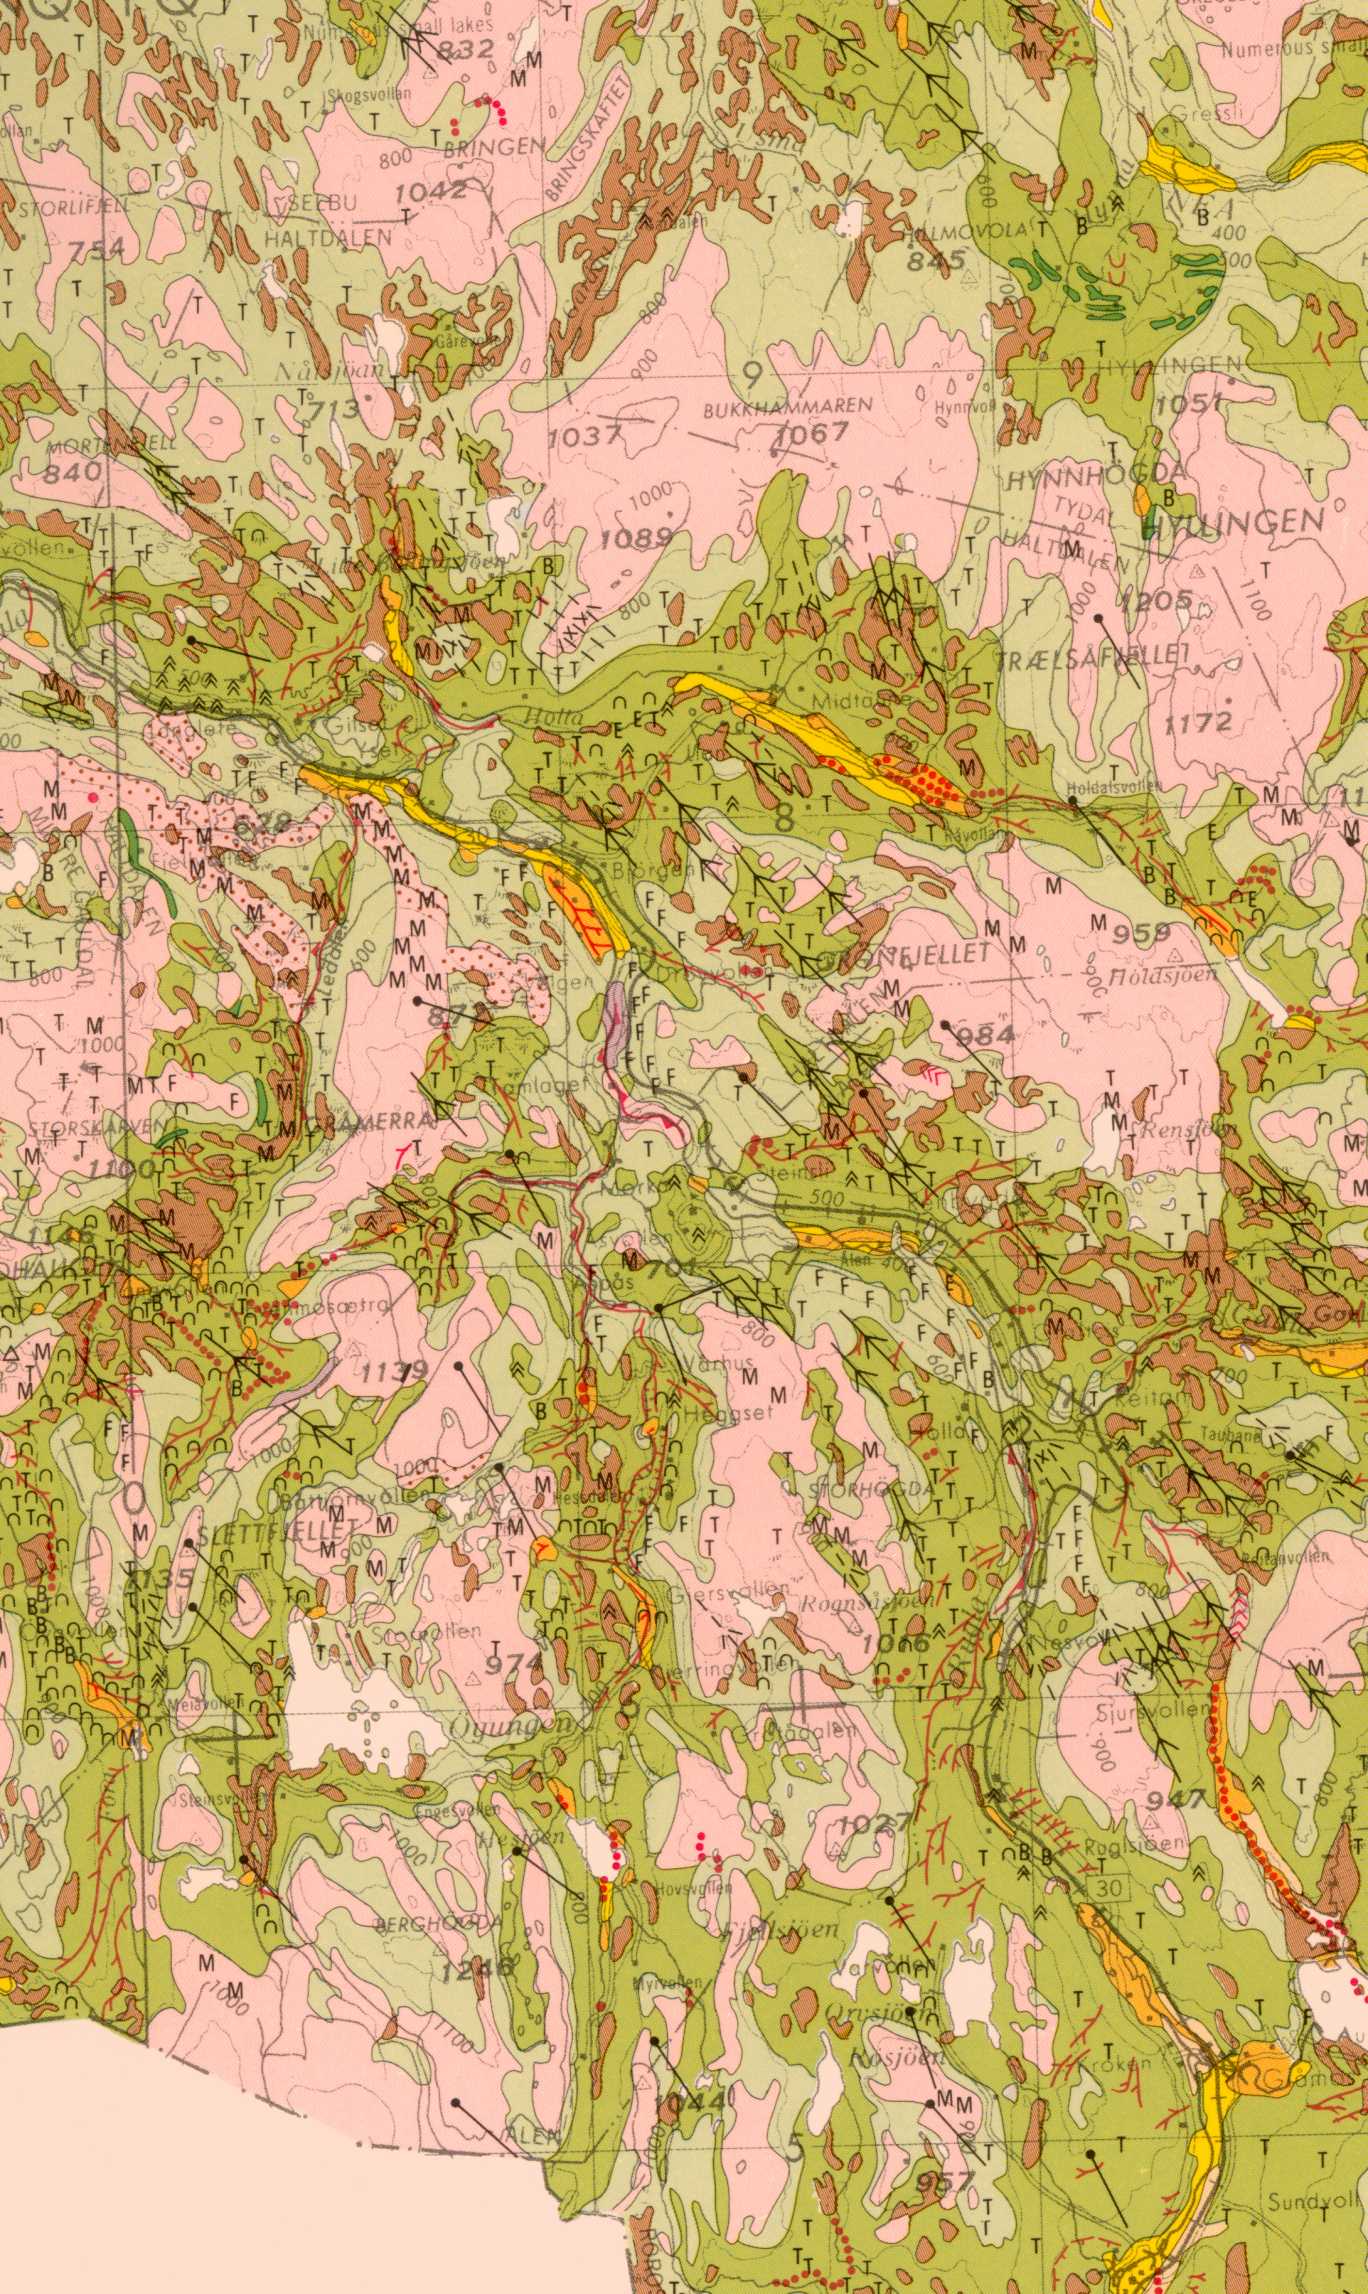 The Quaternary geology in the Hessdalen district